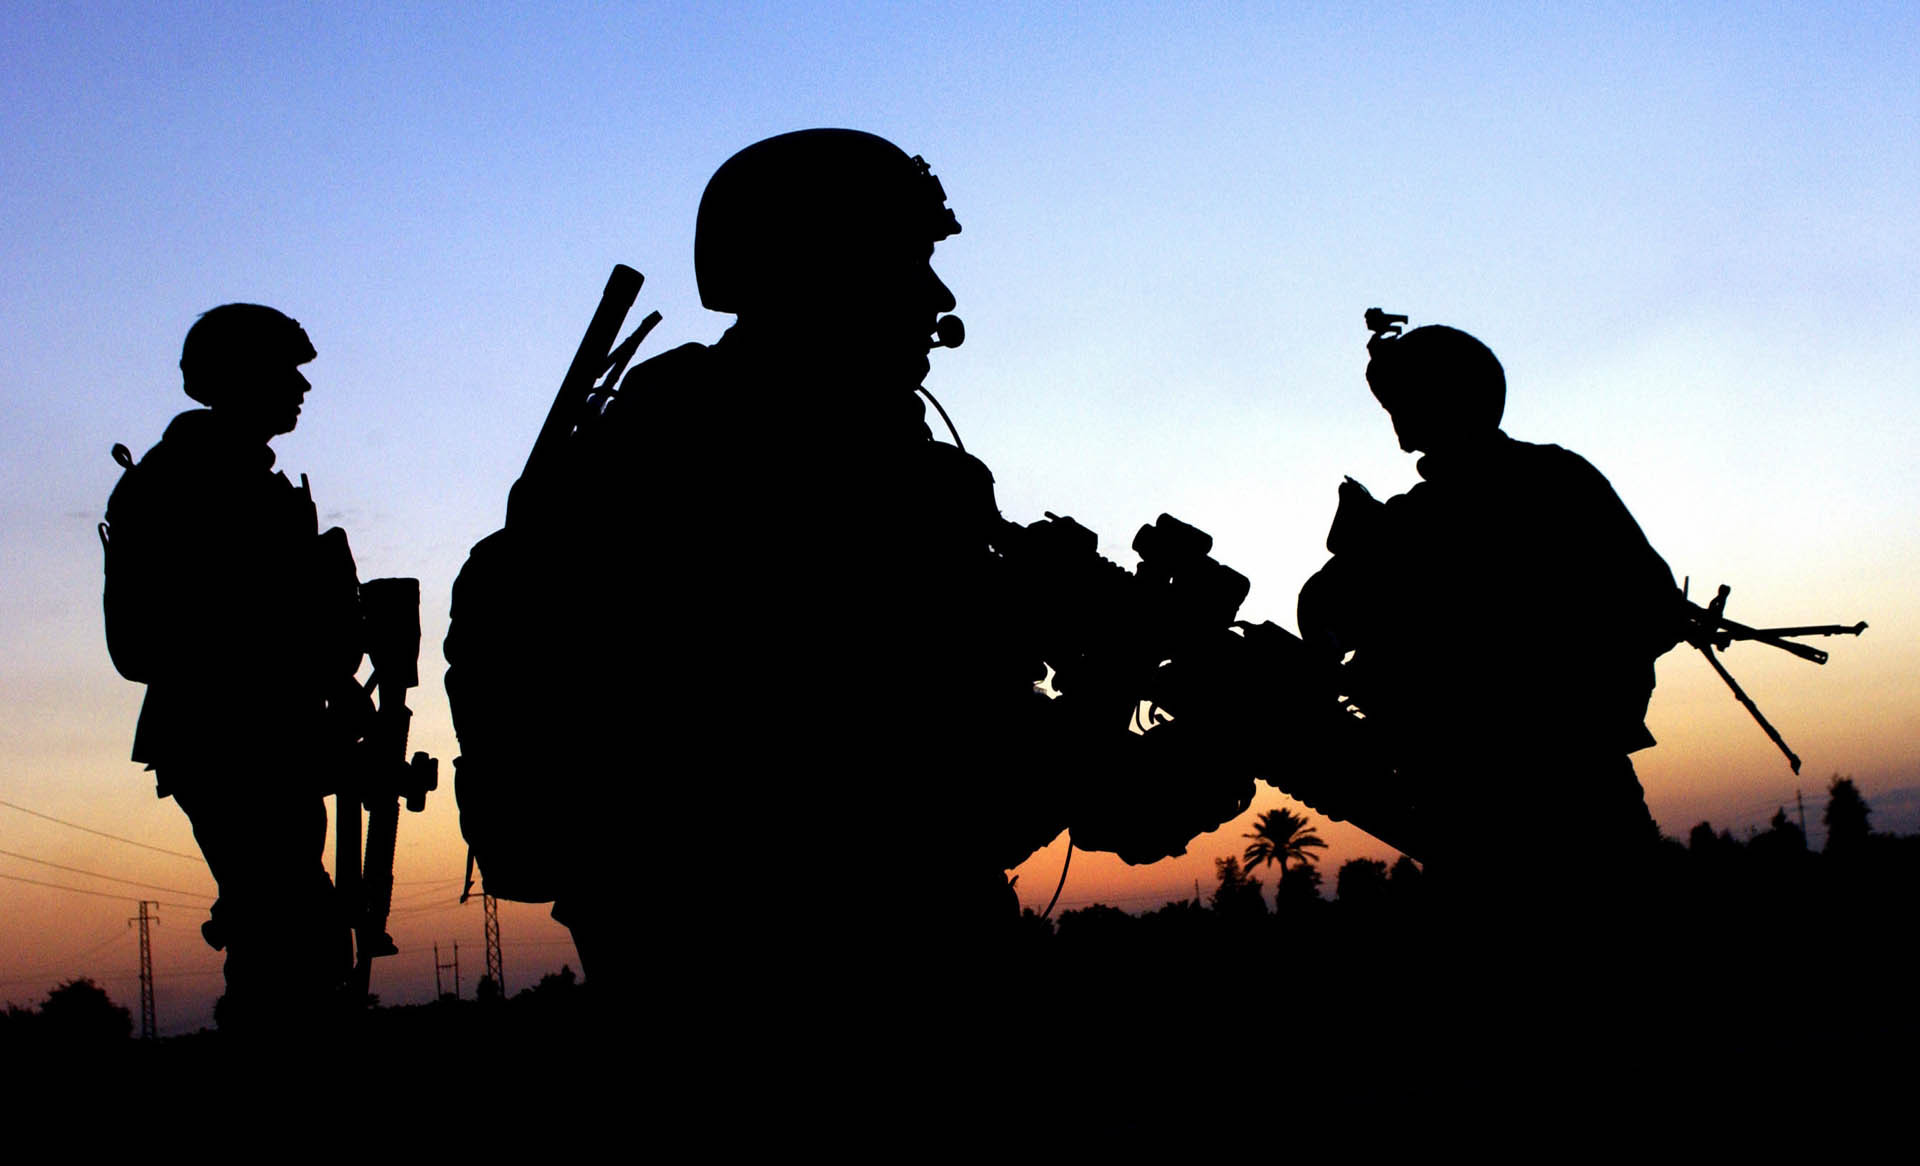 army wallpaper4 Best Army Silhouetted Wallpapers